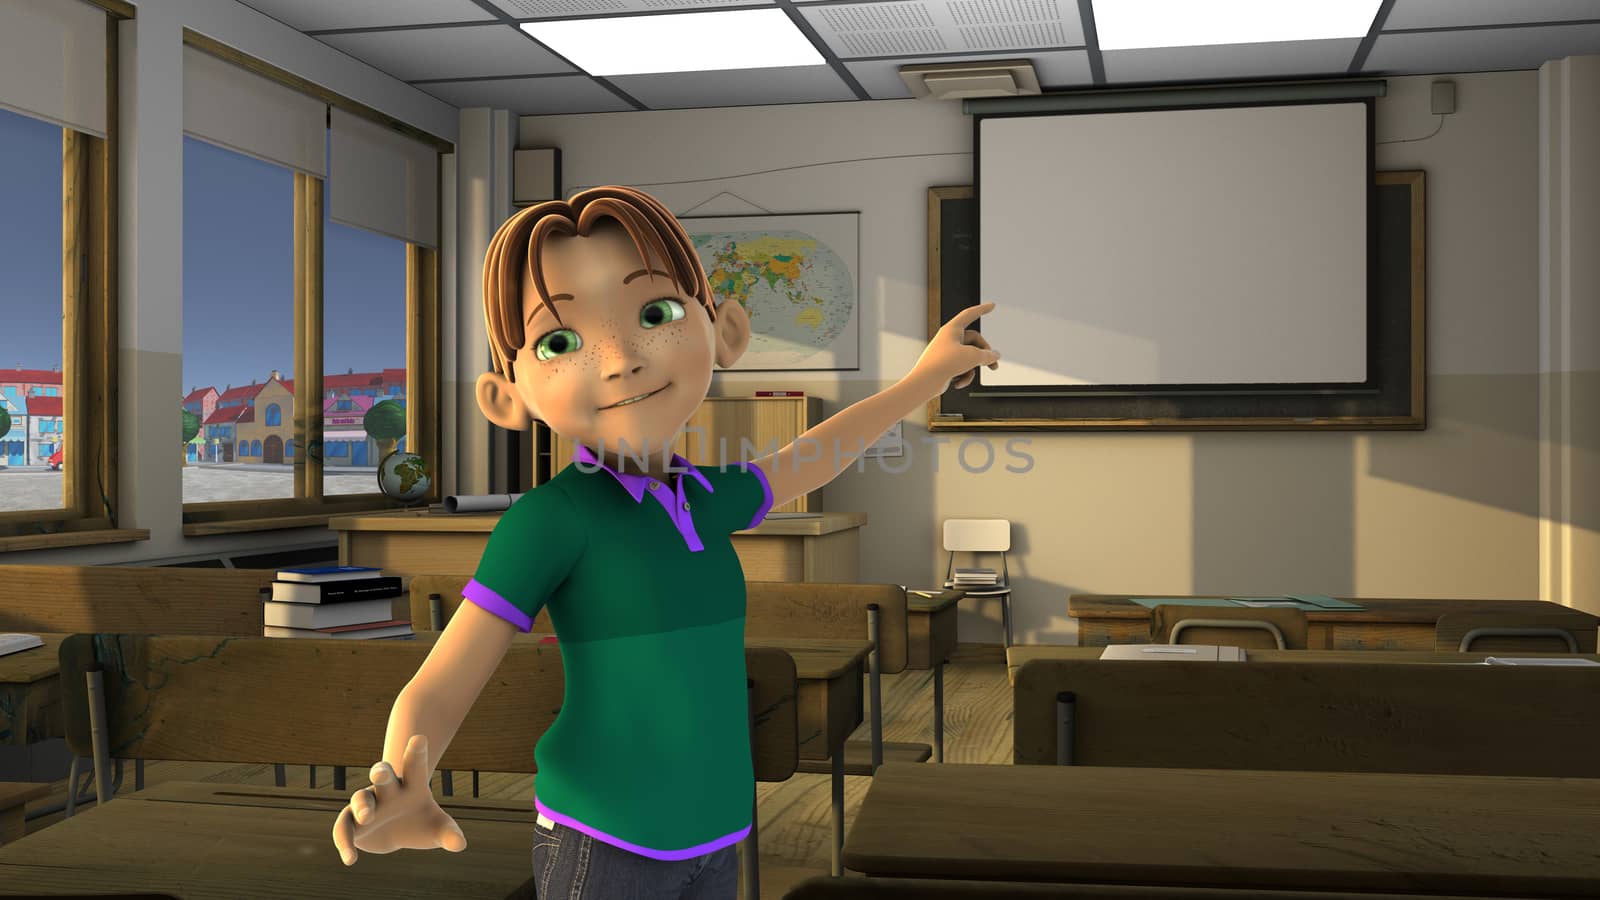 Boy in classroom indicating on the screen.